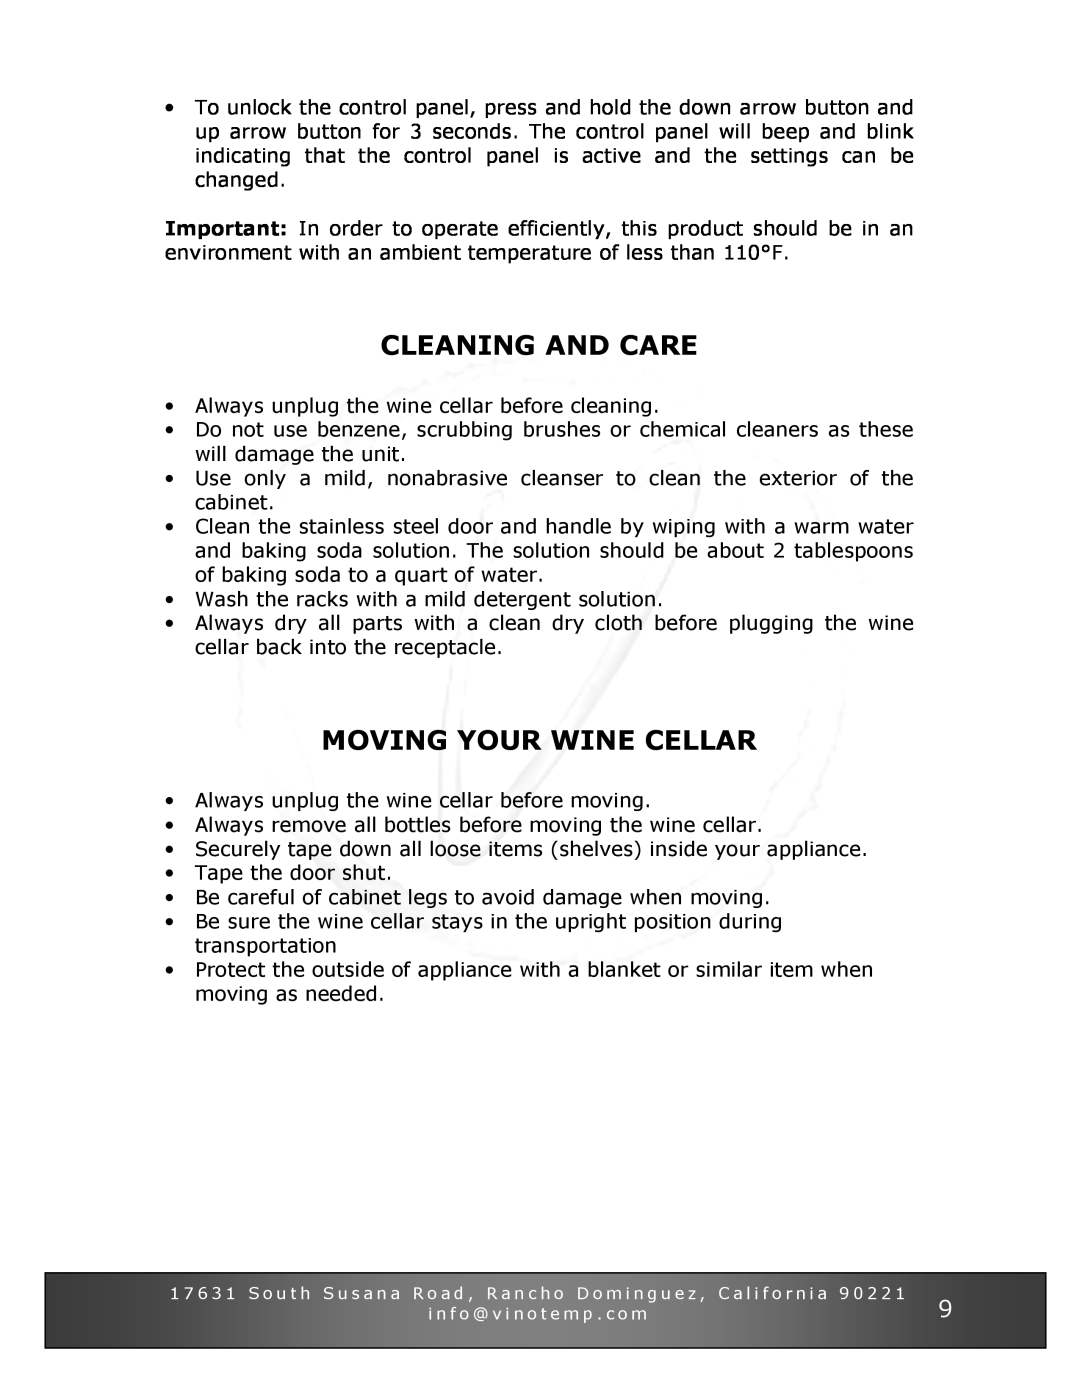 Vinotemp VT-34 TS owner manual Cleaning And Care, Moving Your Wine Cellar 